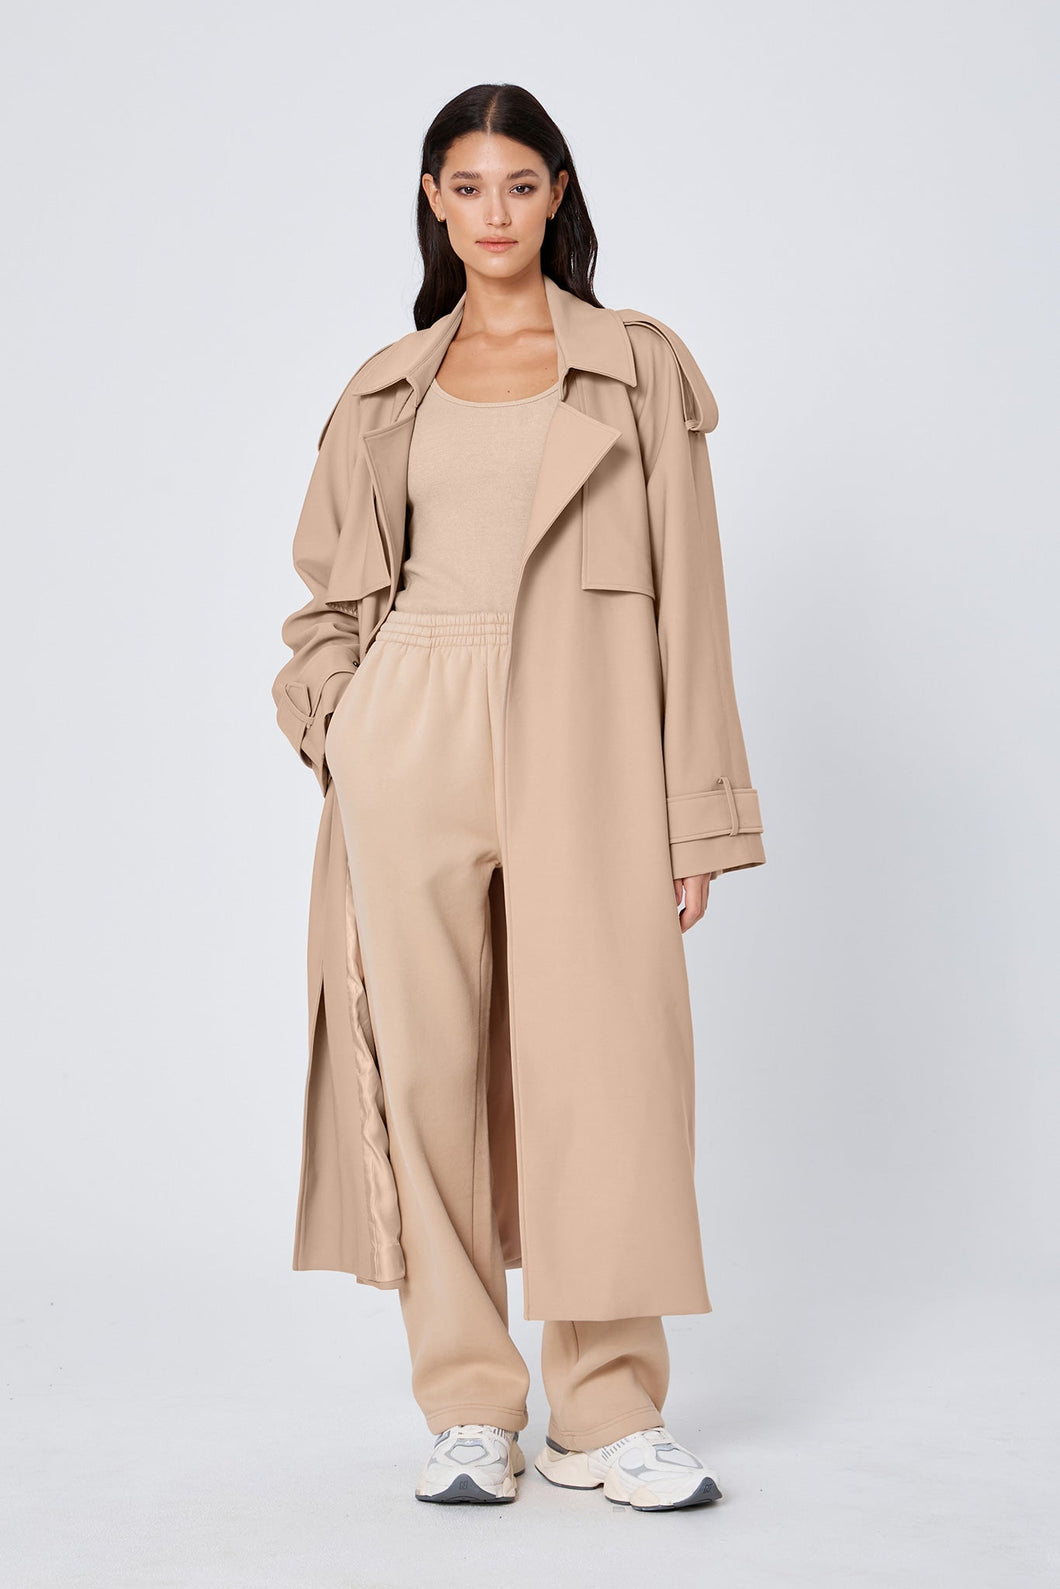 The Trench Coat in Sand